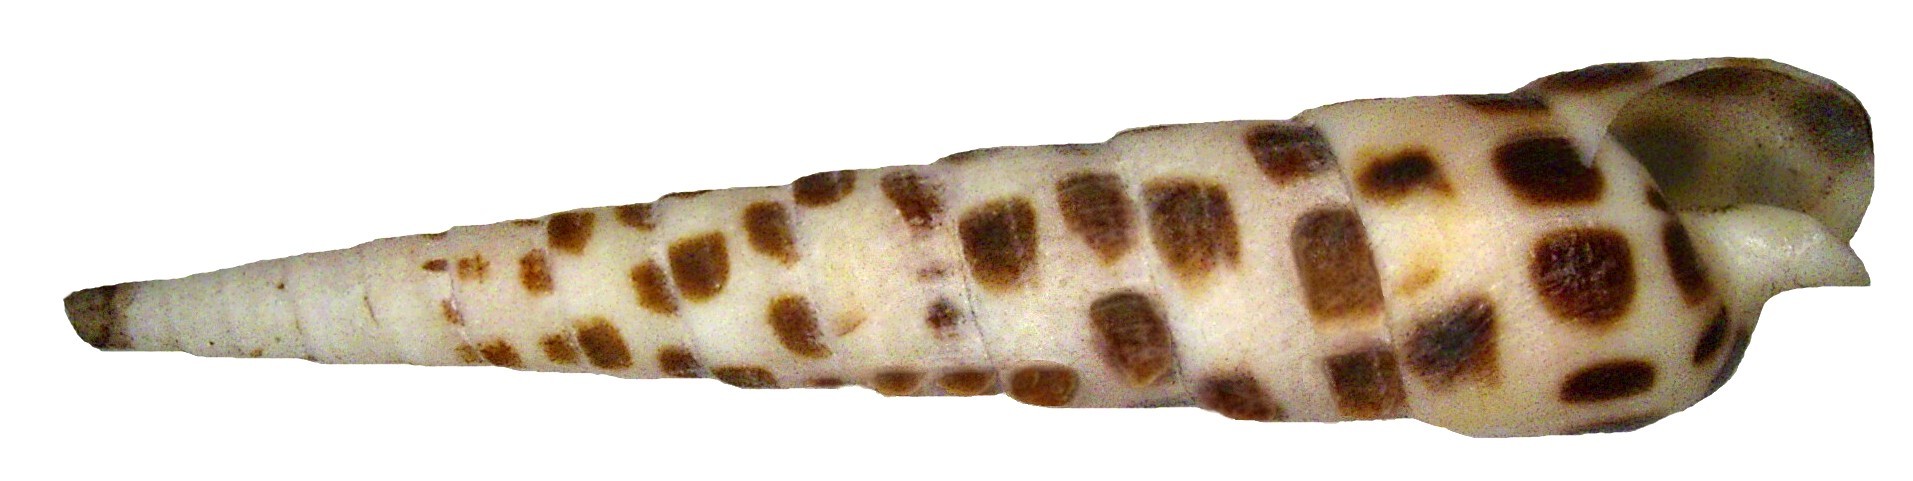 Image of chocolate spotted auger